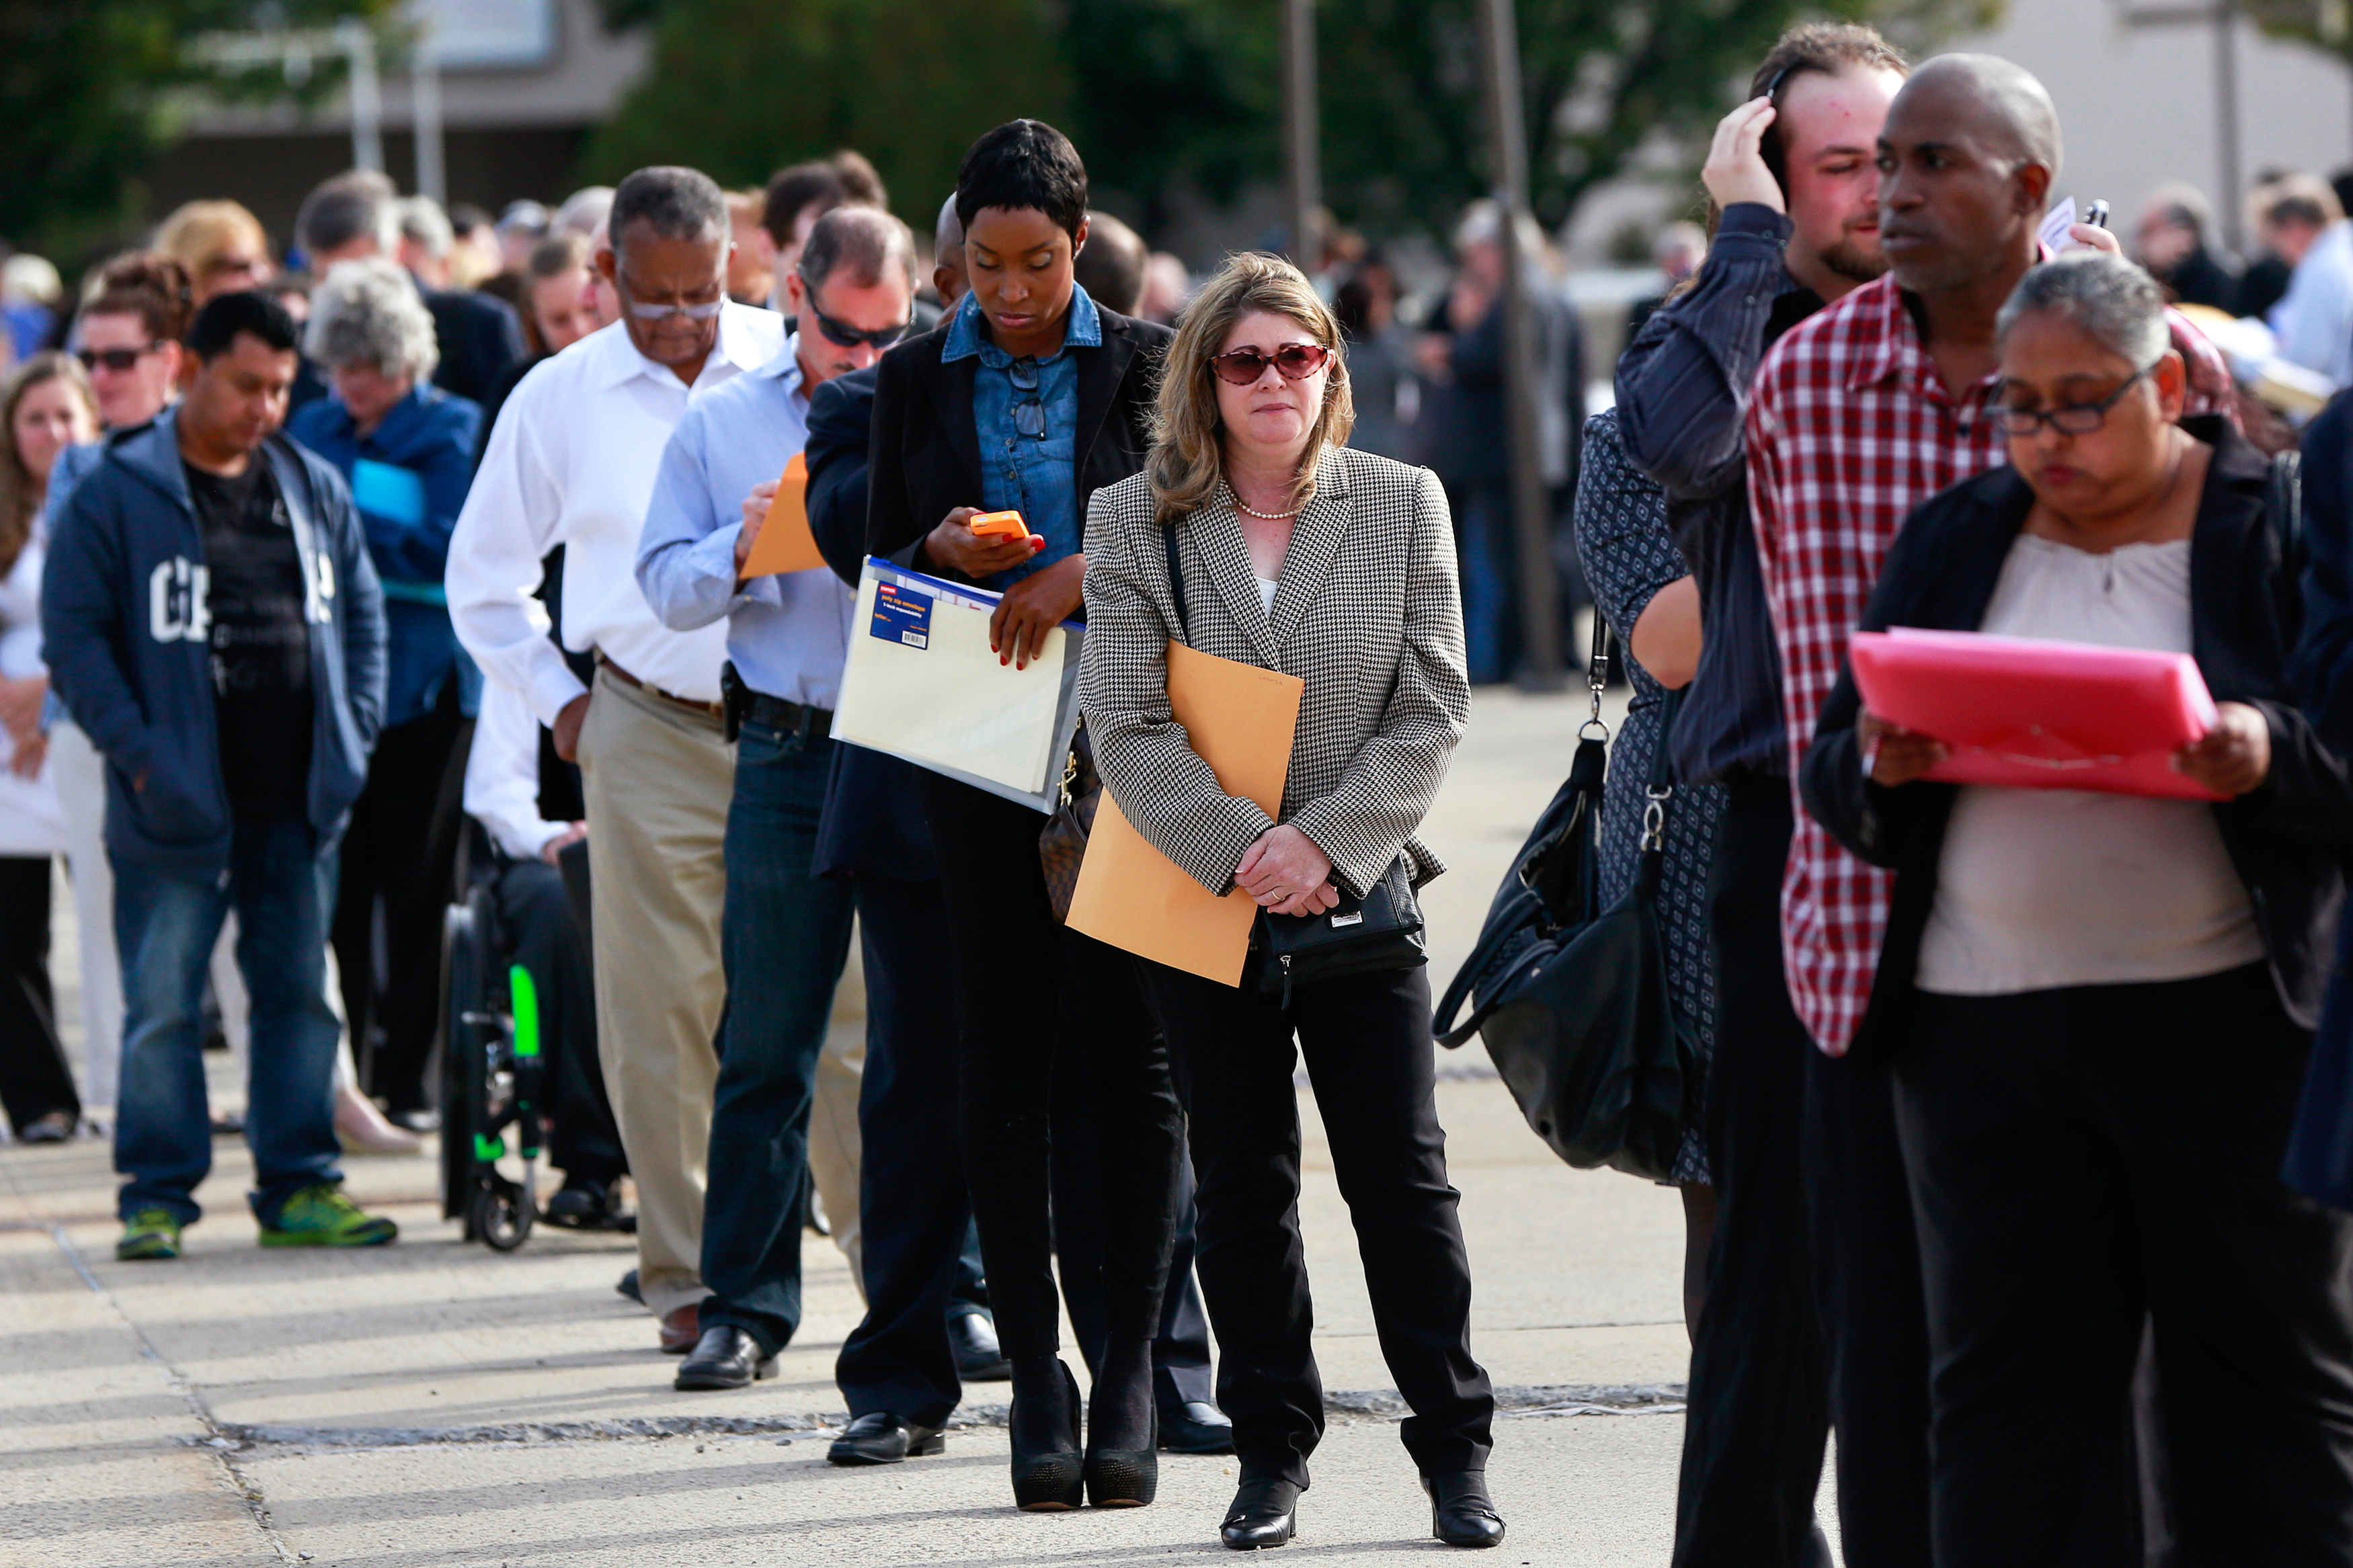 People wait in line to enter the Nassau County Mega Job Fair at Nassau Veterans Memorial Coliseum in Uniondale, New York October 7, 2014. U.S. job openings rose to their highest level in more than 13 years in August even as hiring fell, the U.S. Department of Labor said. REUTERS/Shannon Stapleton/File Photo